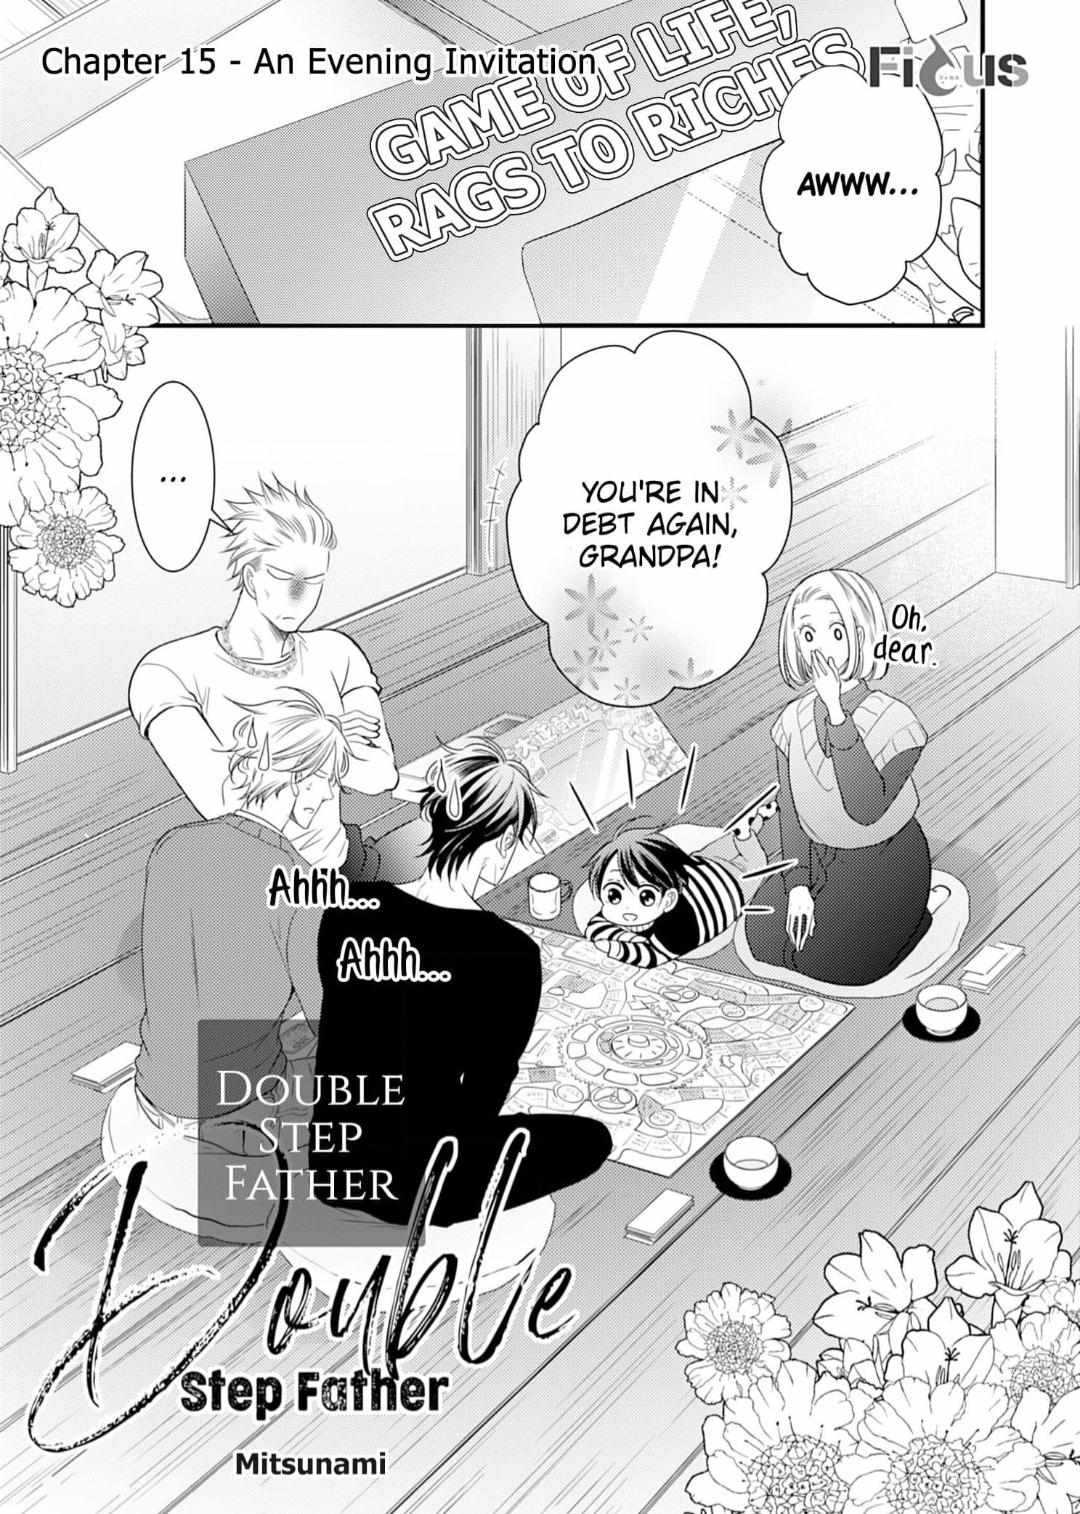 Double Step Father - 15 page 1-a01b4b2d